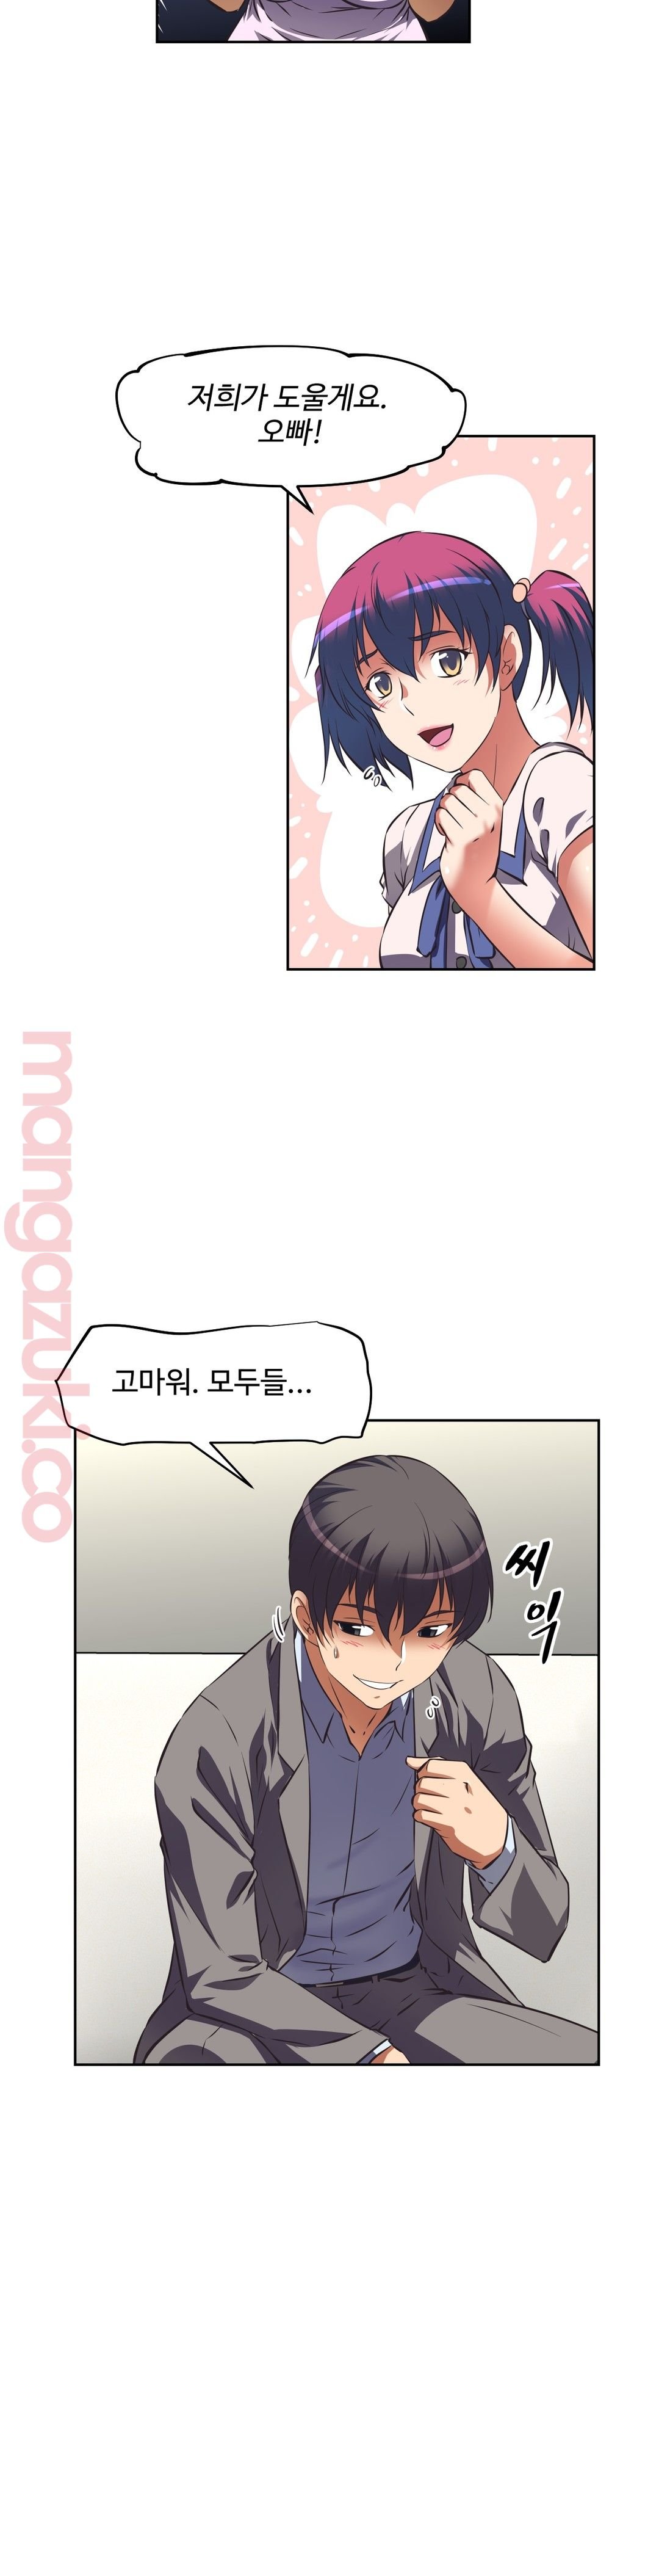 The Girls’ Nest Raw - Chapter 33 Page 5